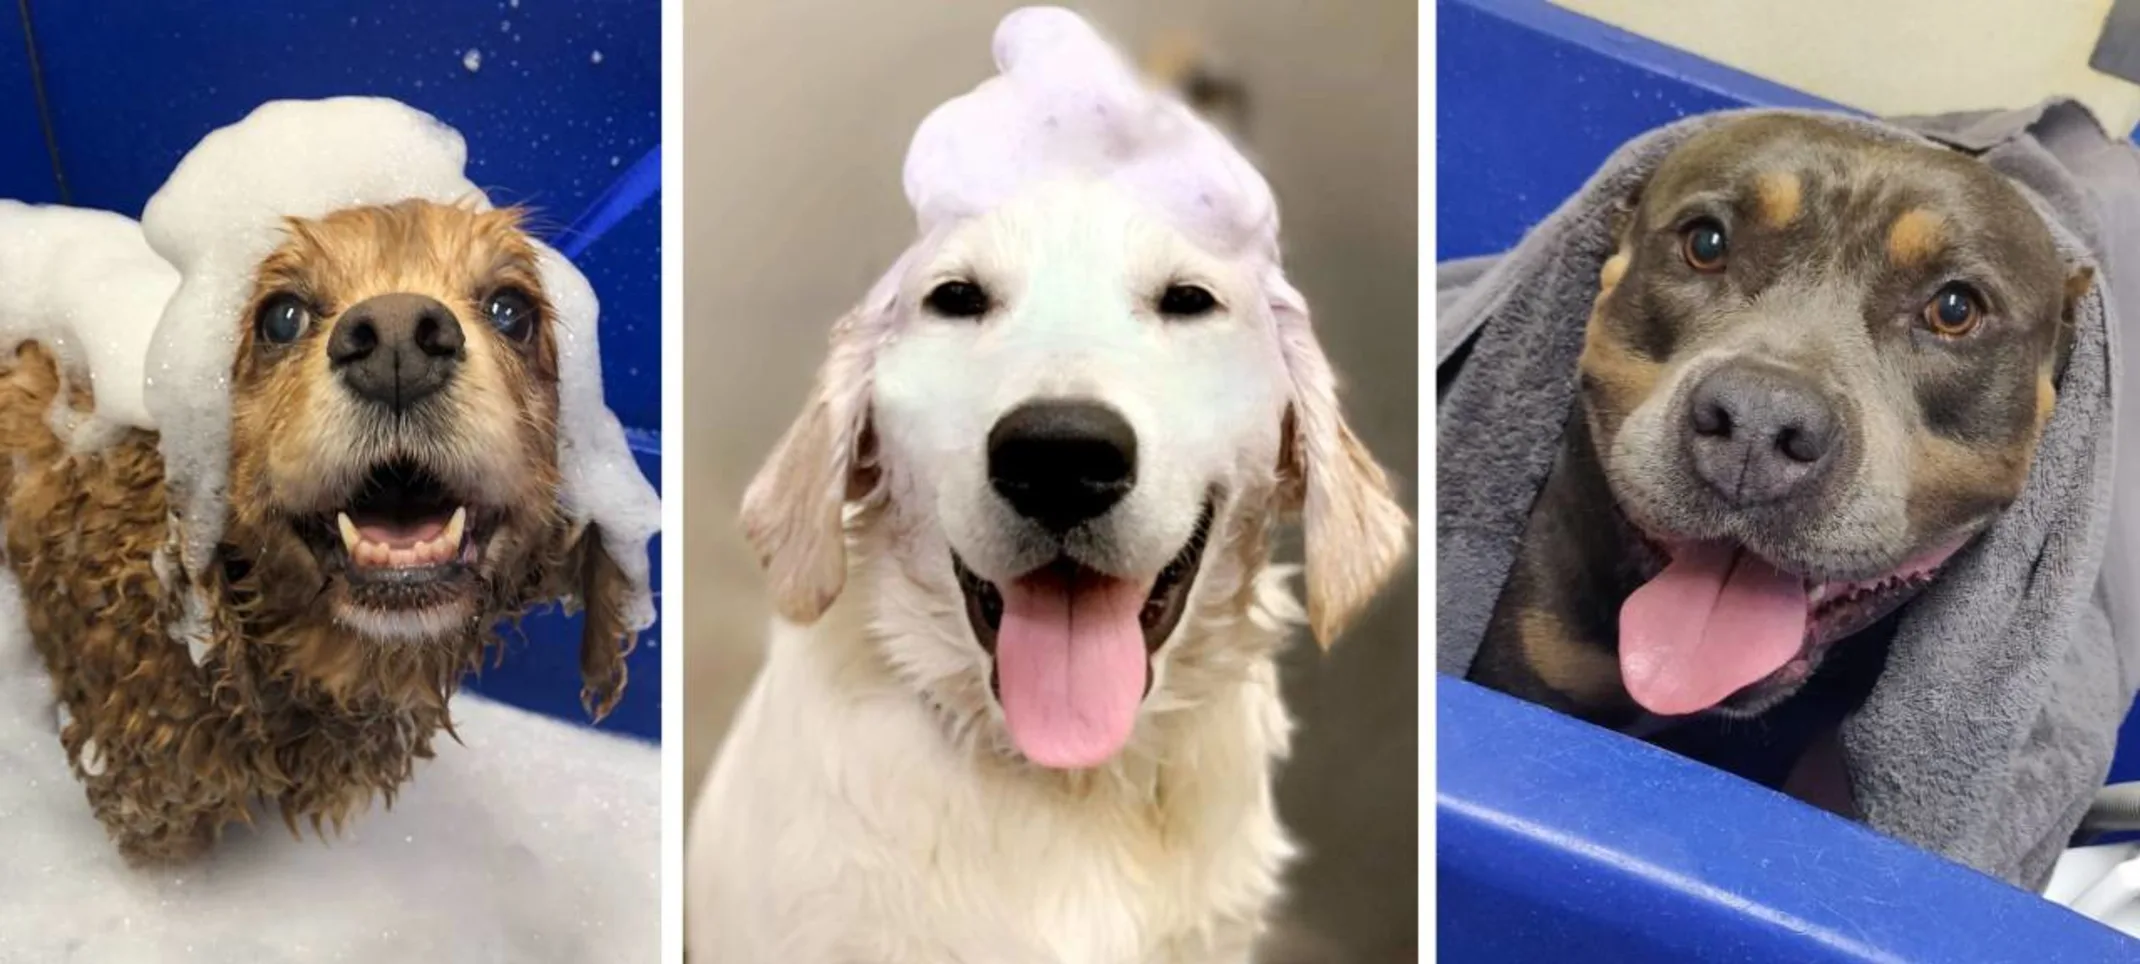 Dogs enjoying a bath at Lafayette Veterinary Care Clinic.